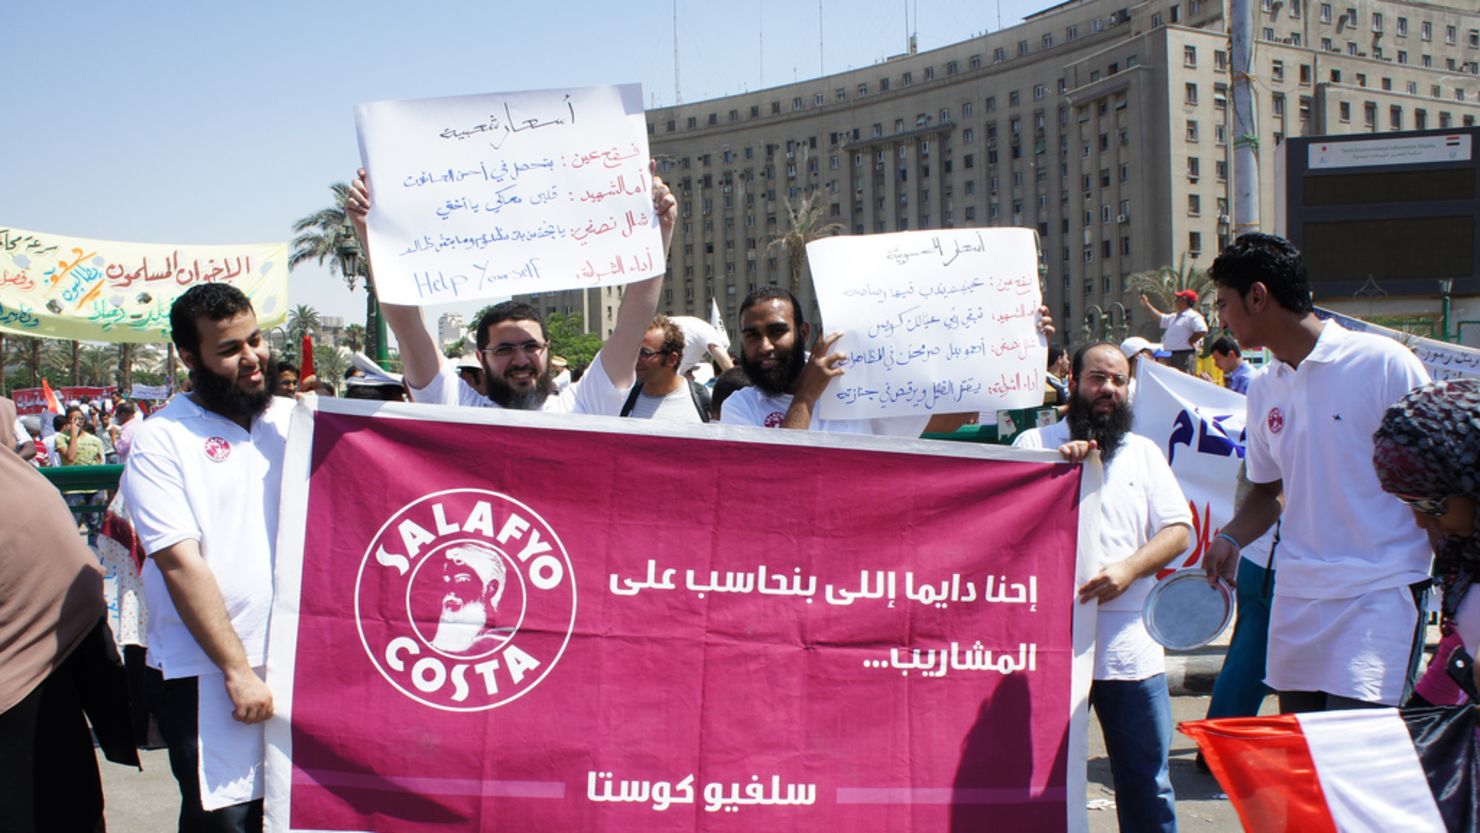 Members of the Salafyo Costa group in Tahrir Square during the first Friday protest in Cairo on July 8. 